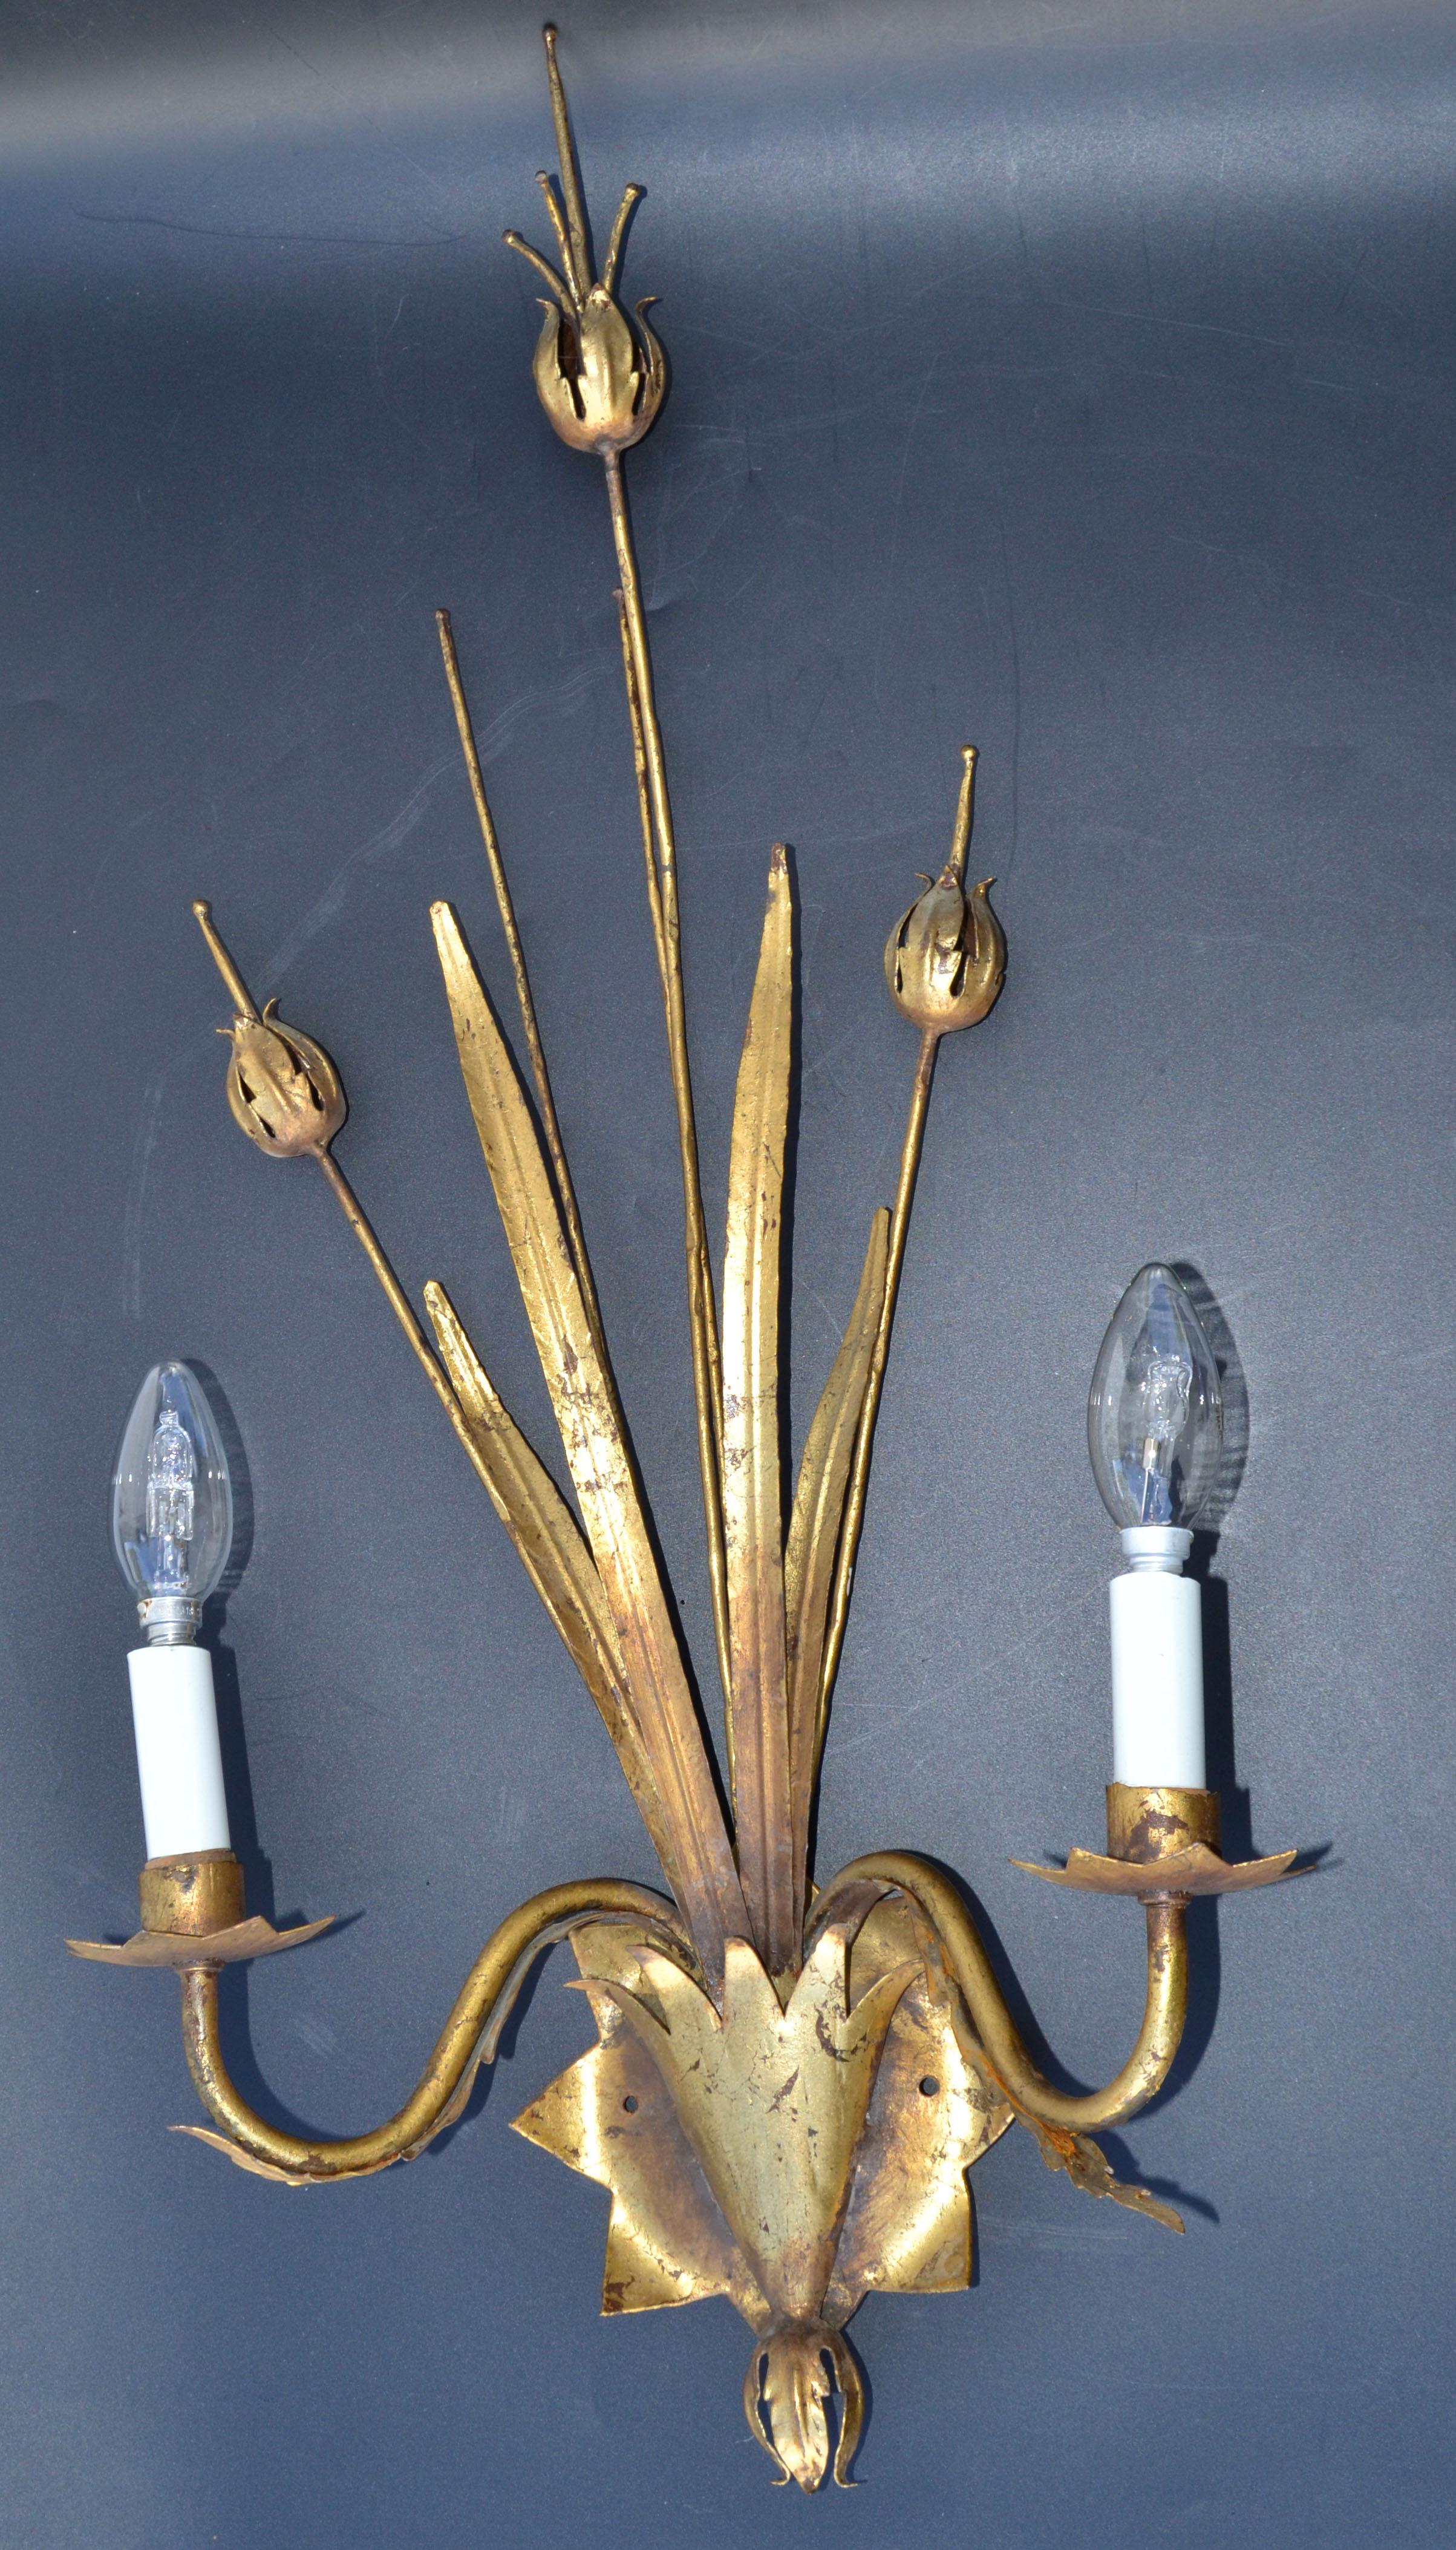 Pair of Large Ferrocolor Sconces Wheat Wall Lights Mid-Century Modern Spain 1960 For Sale 2